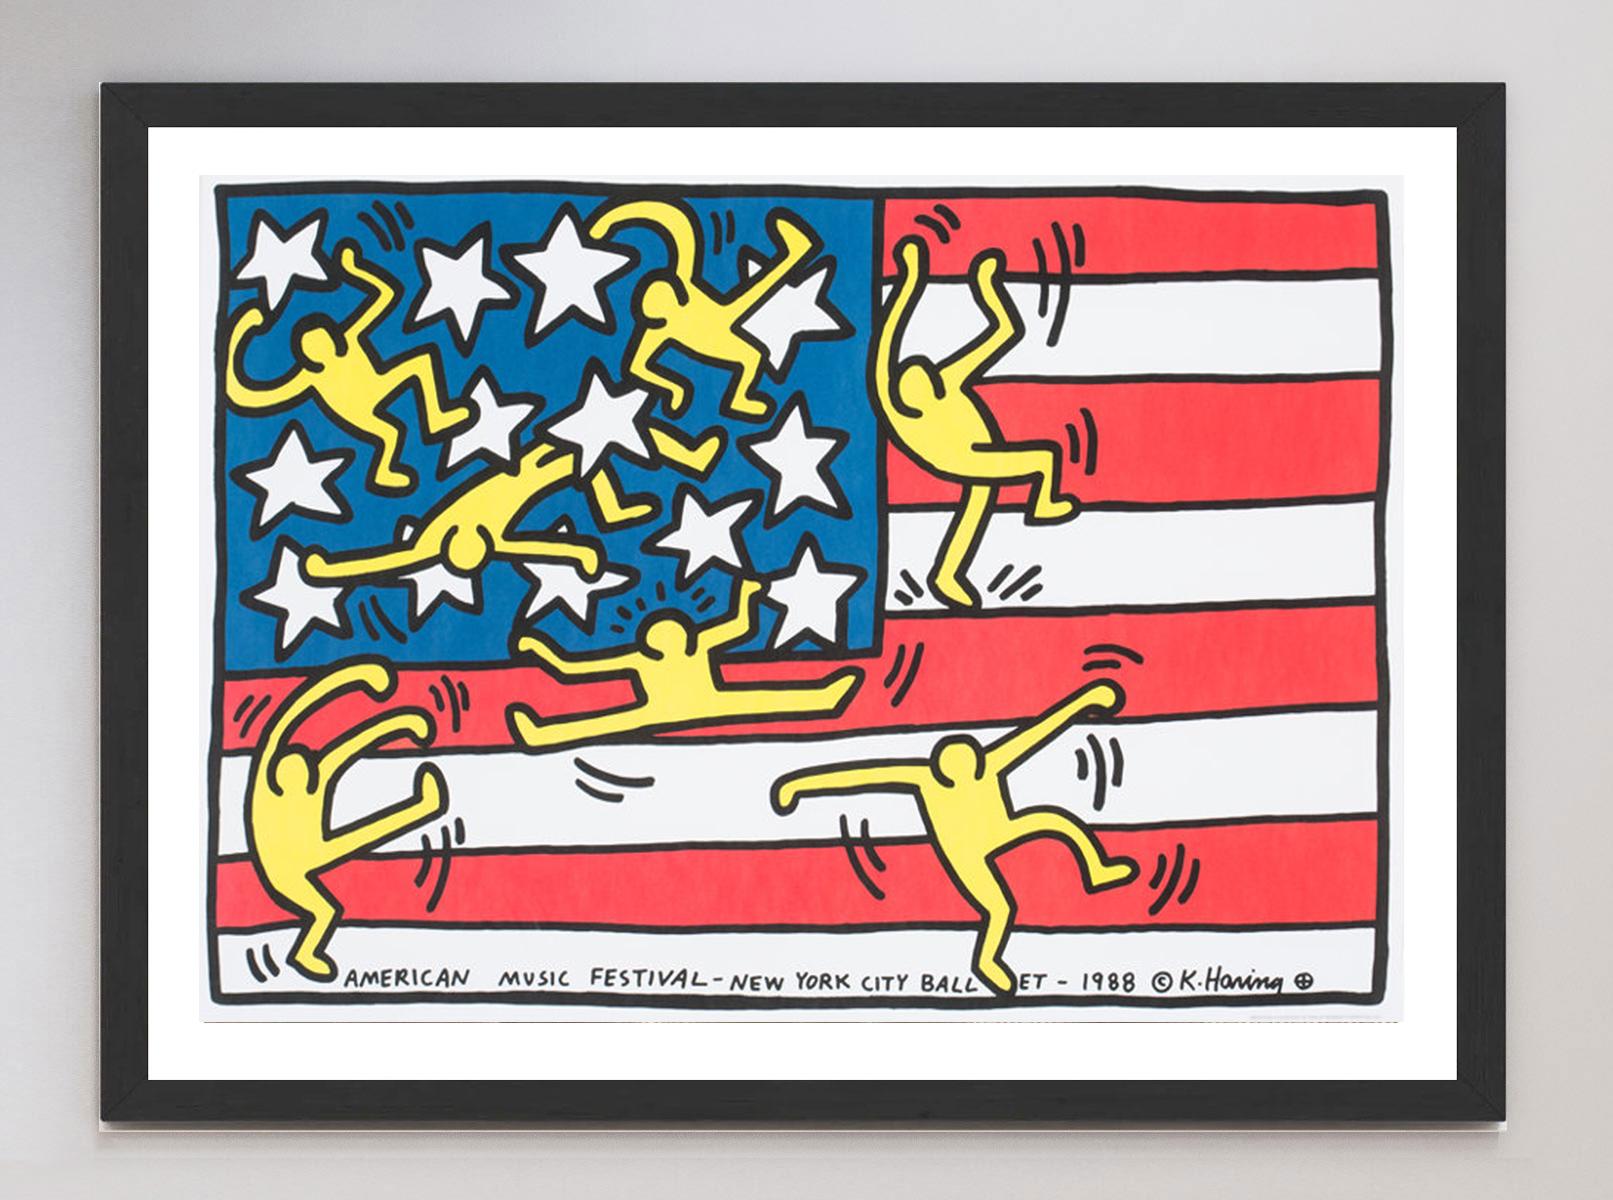 Paper 1988 Keith Haring - American Music Festival - NYC Ballet Original Vintage Poster For Sale